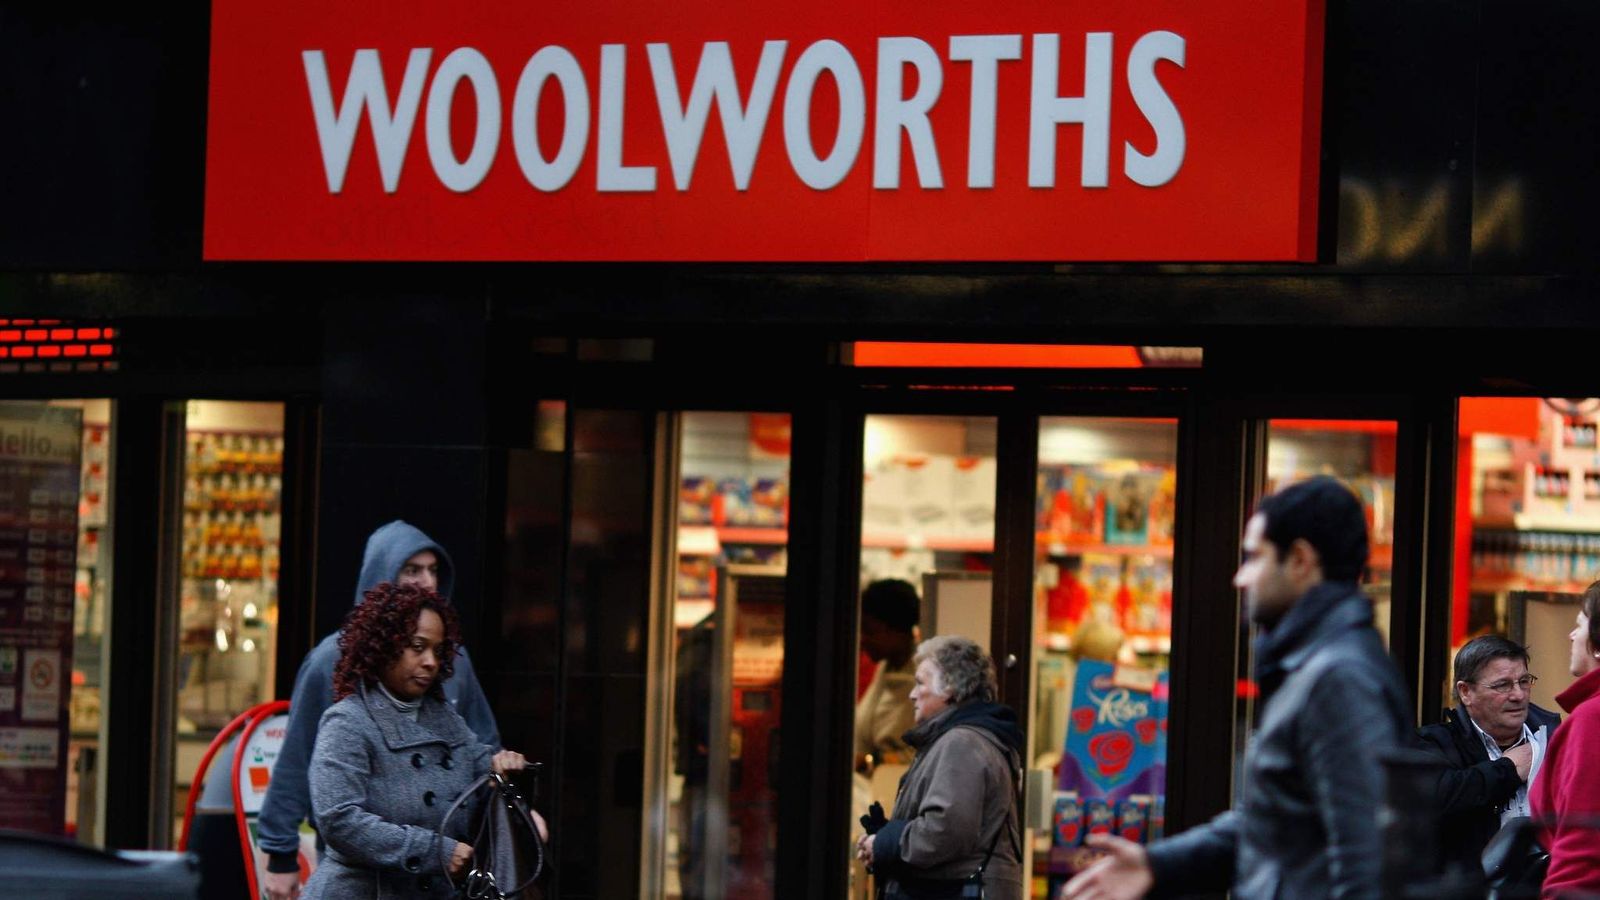 Woolworths demise 15 years on: What happened at the retail giant and could it come back?